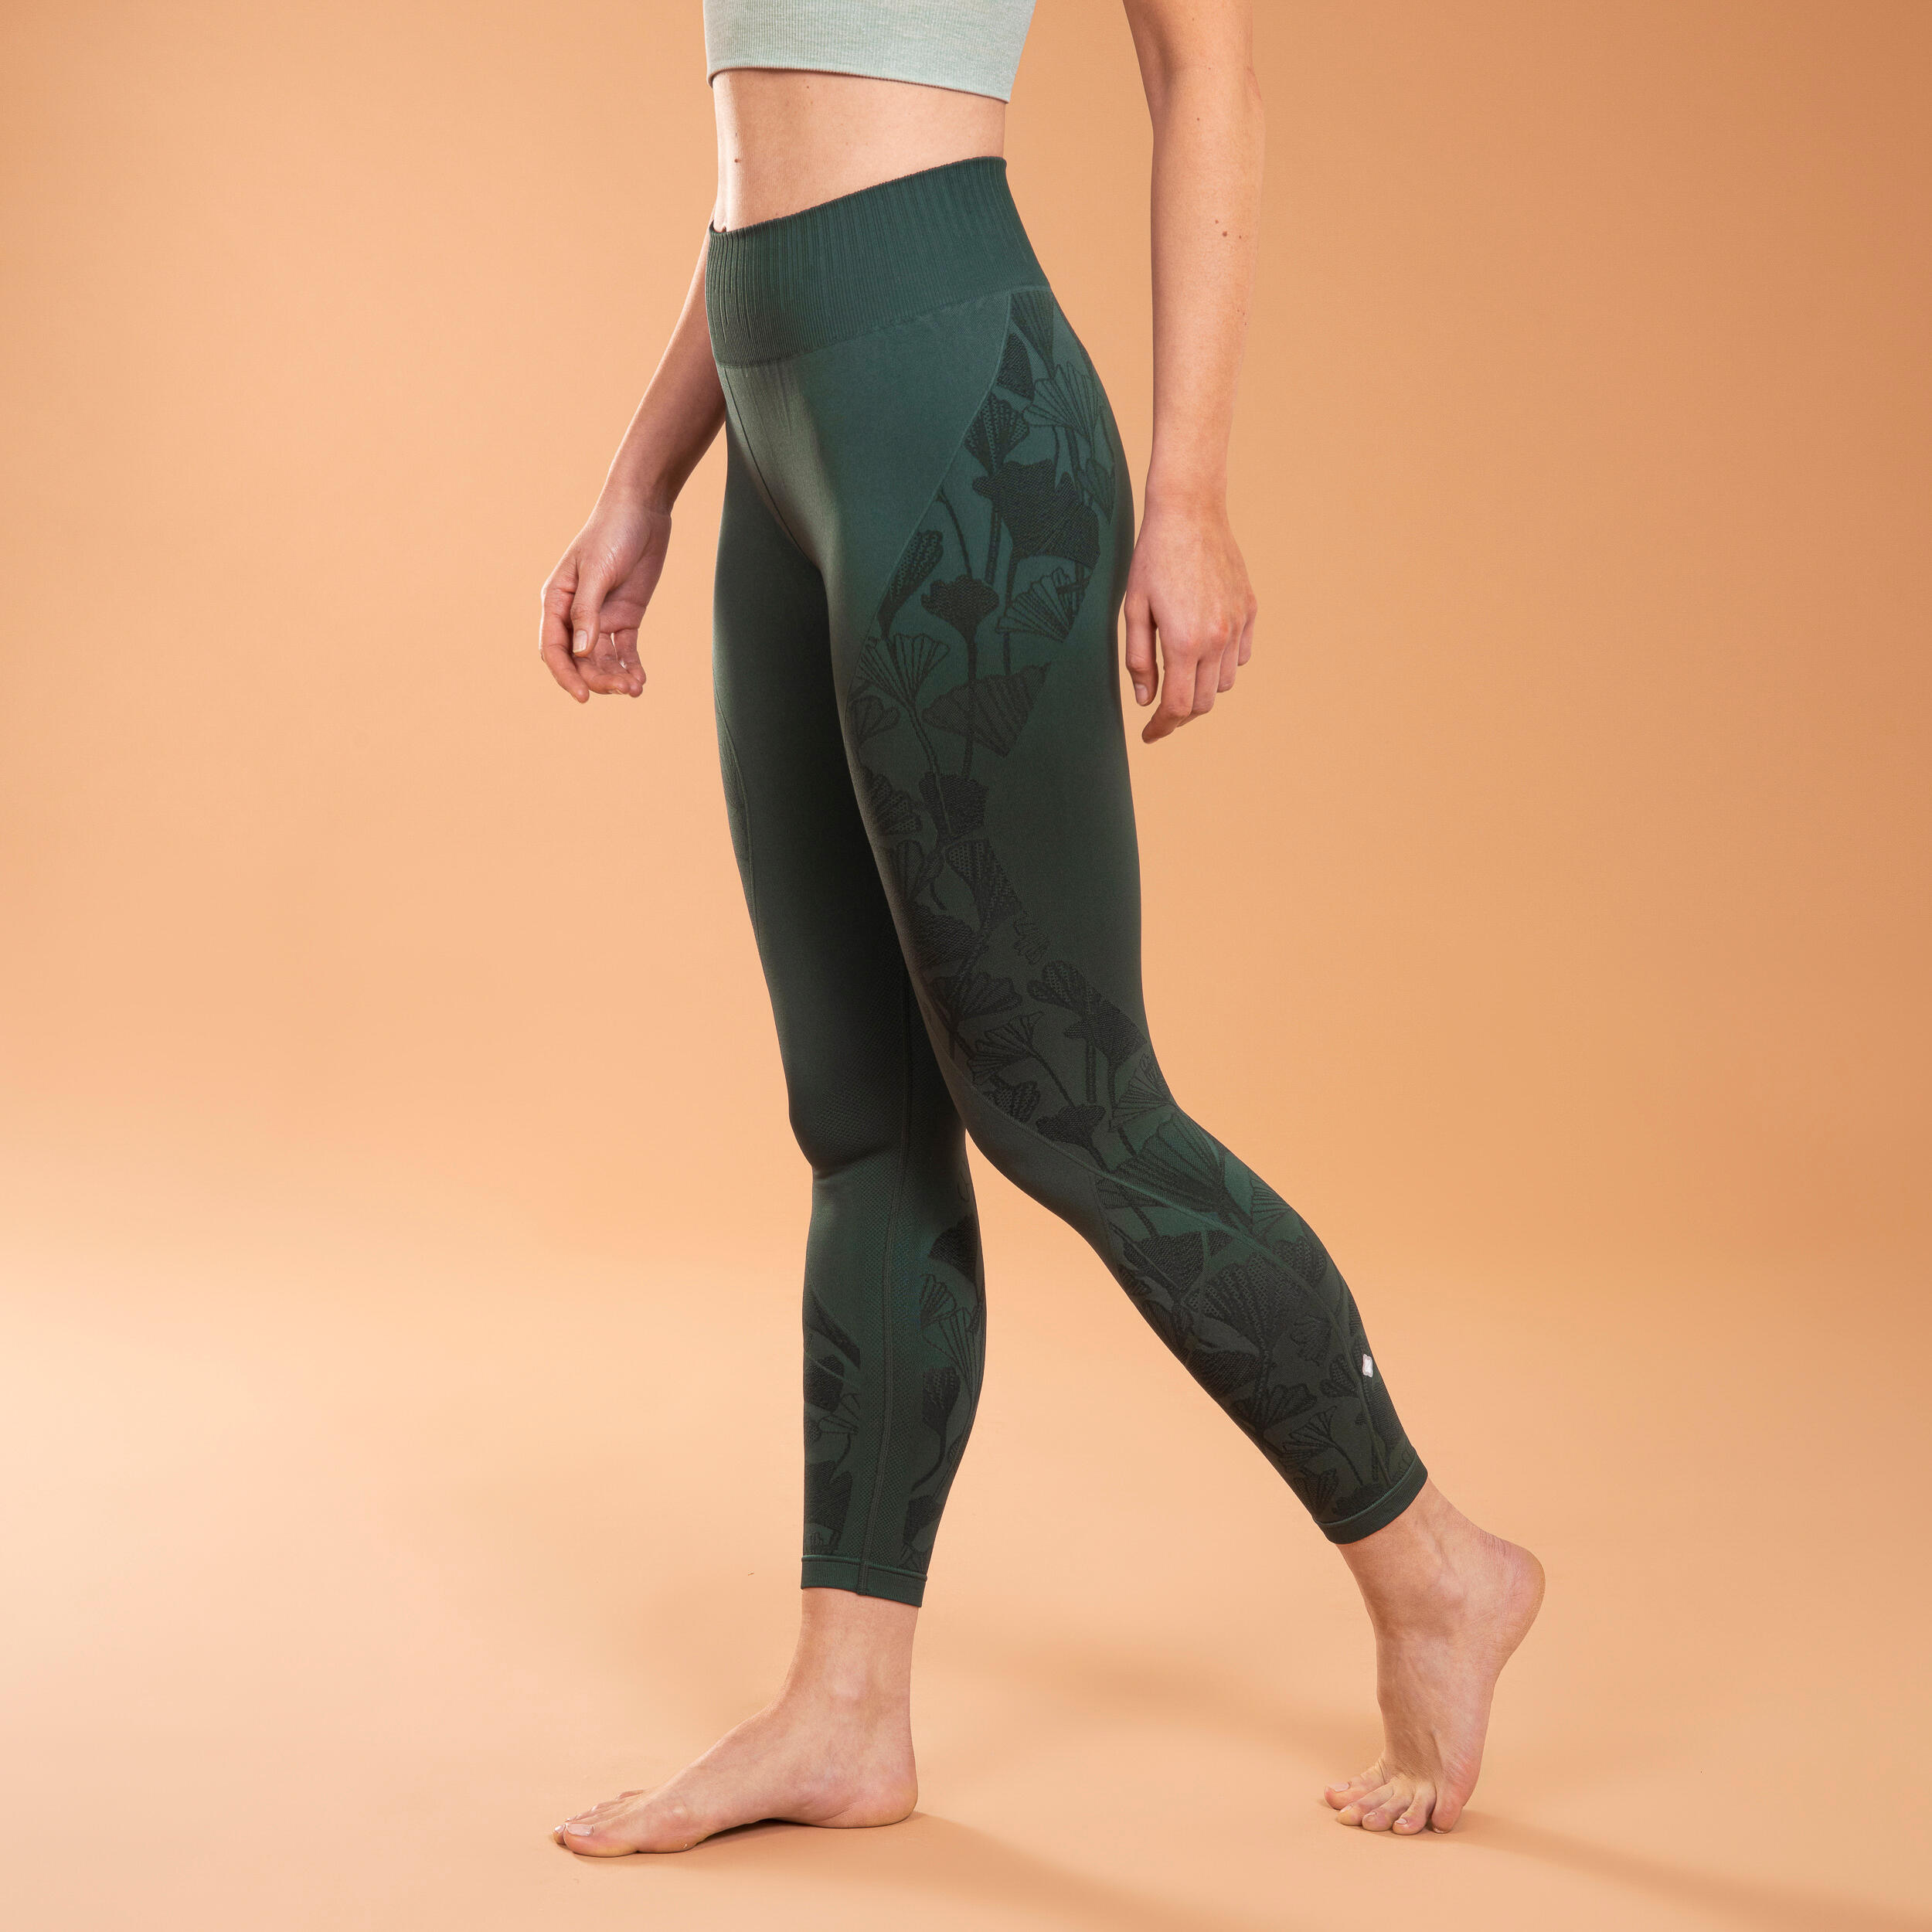 Om 7/8 High Waisted Yoga Leggings With Side Pockets Green 